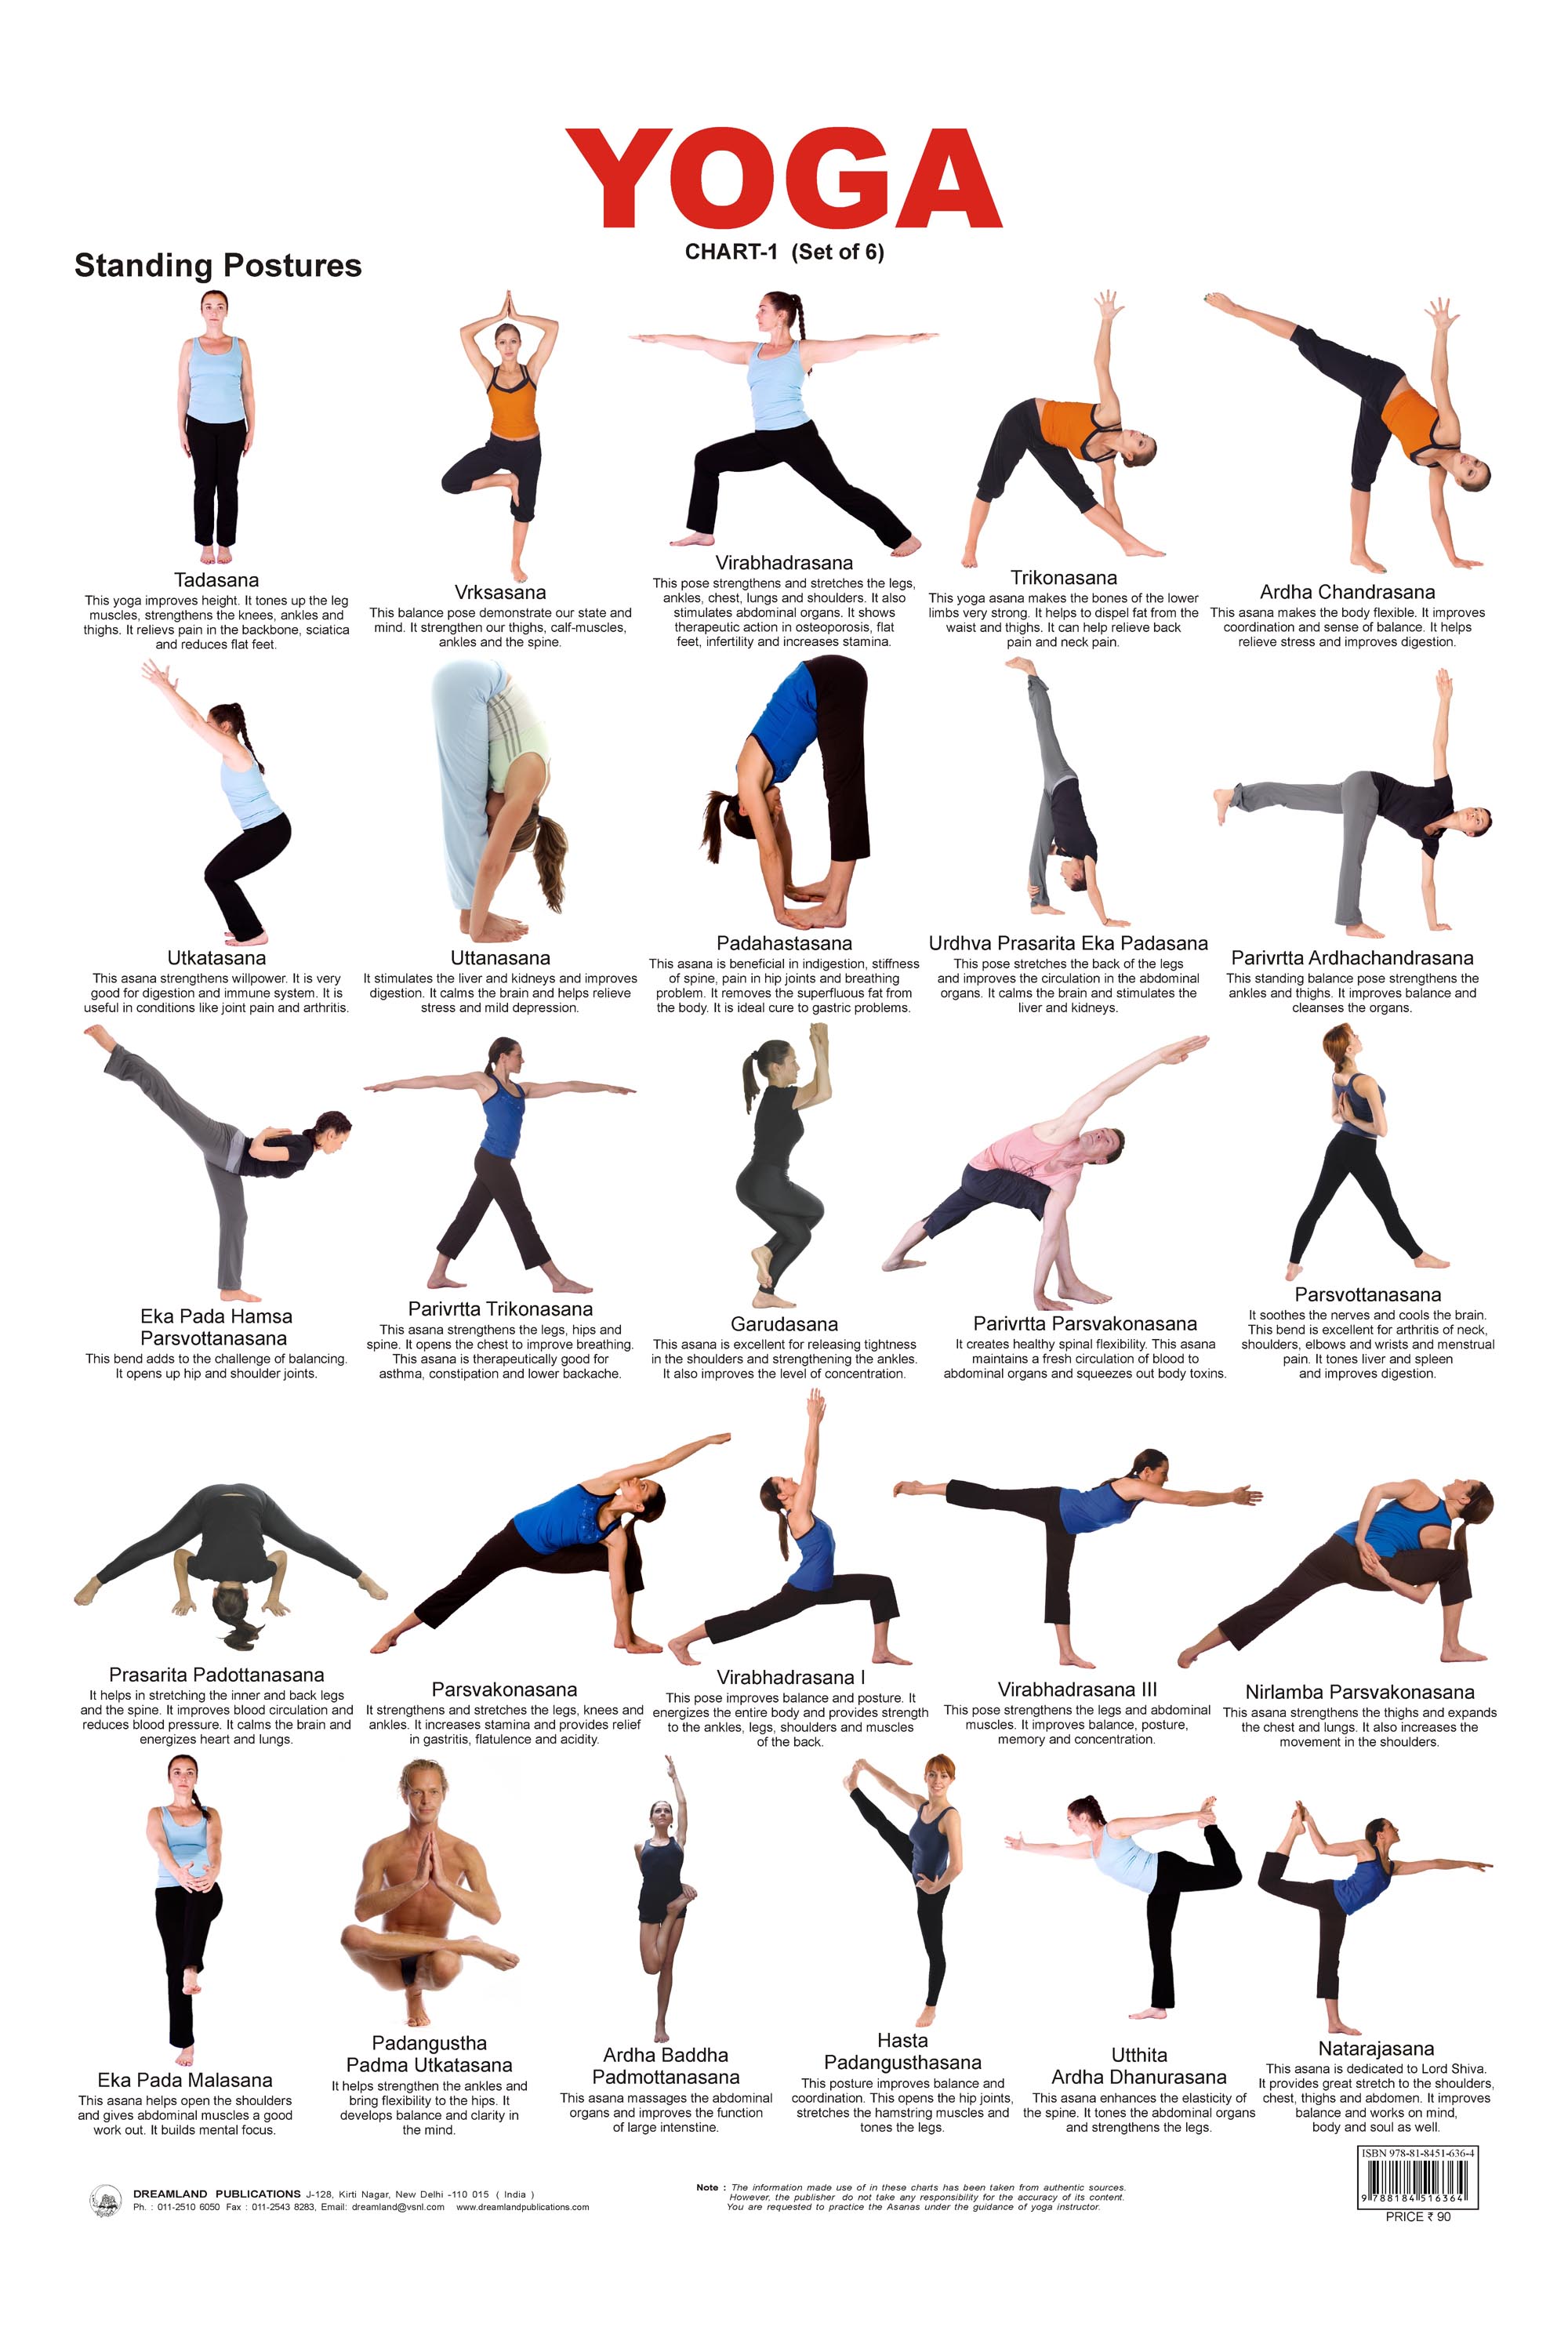 many   There or diagrams different of  are poses Yoga Yoga. poses postures schools yoga